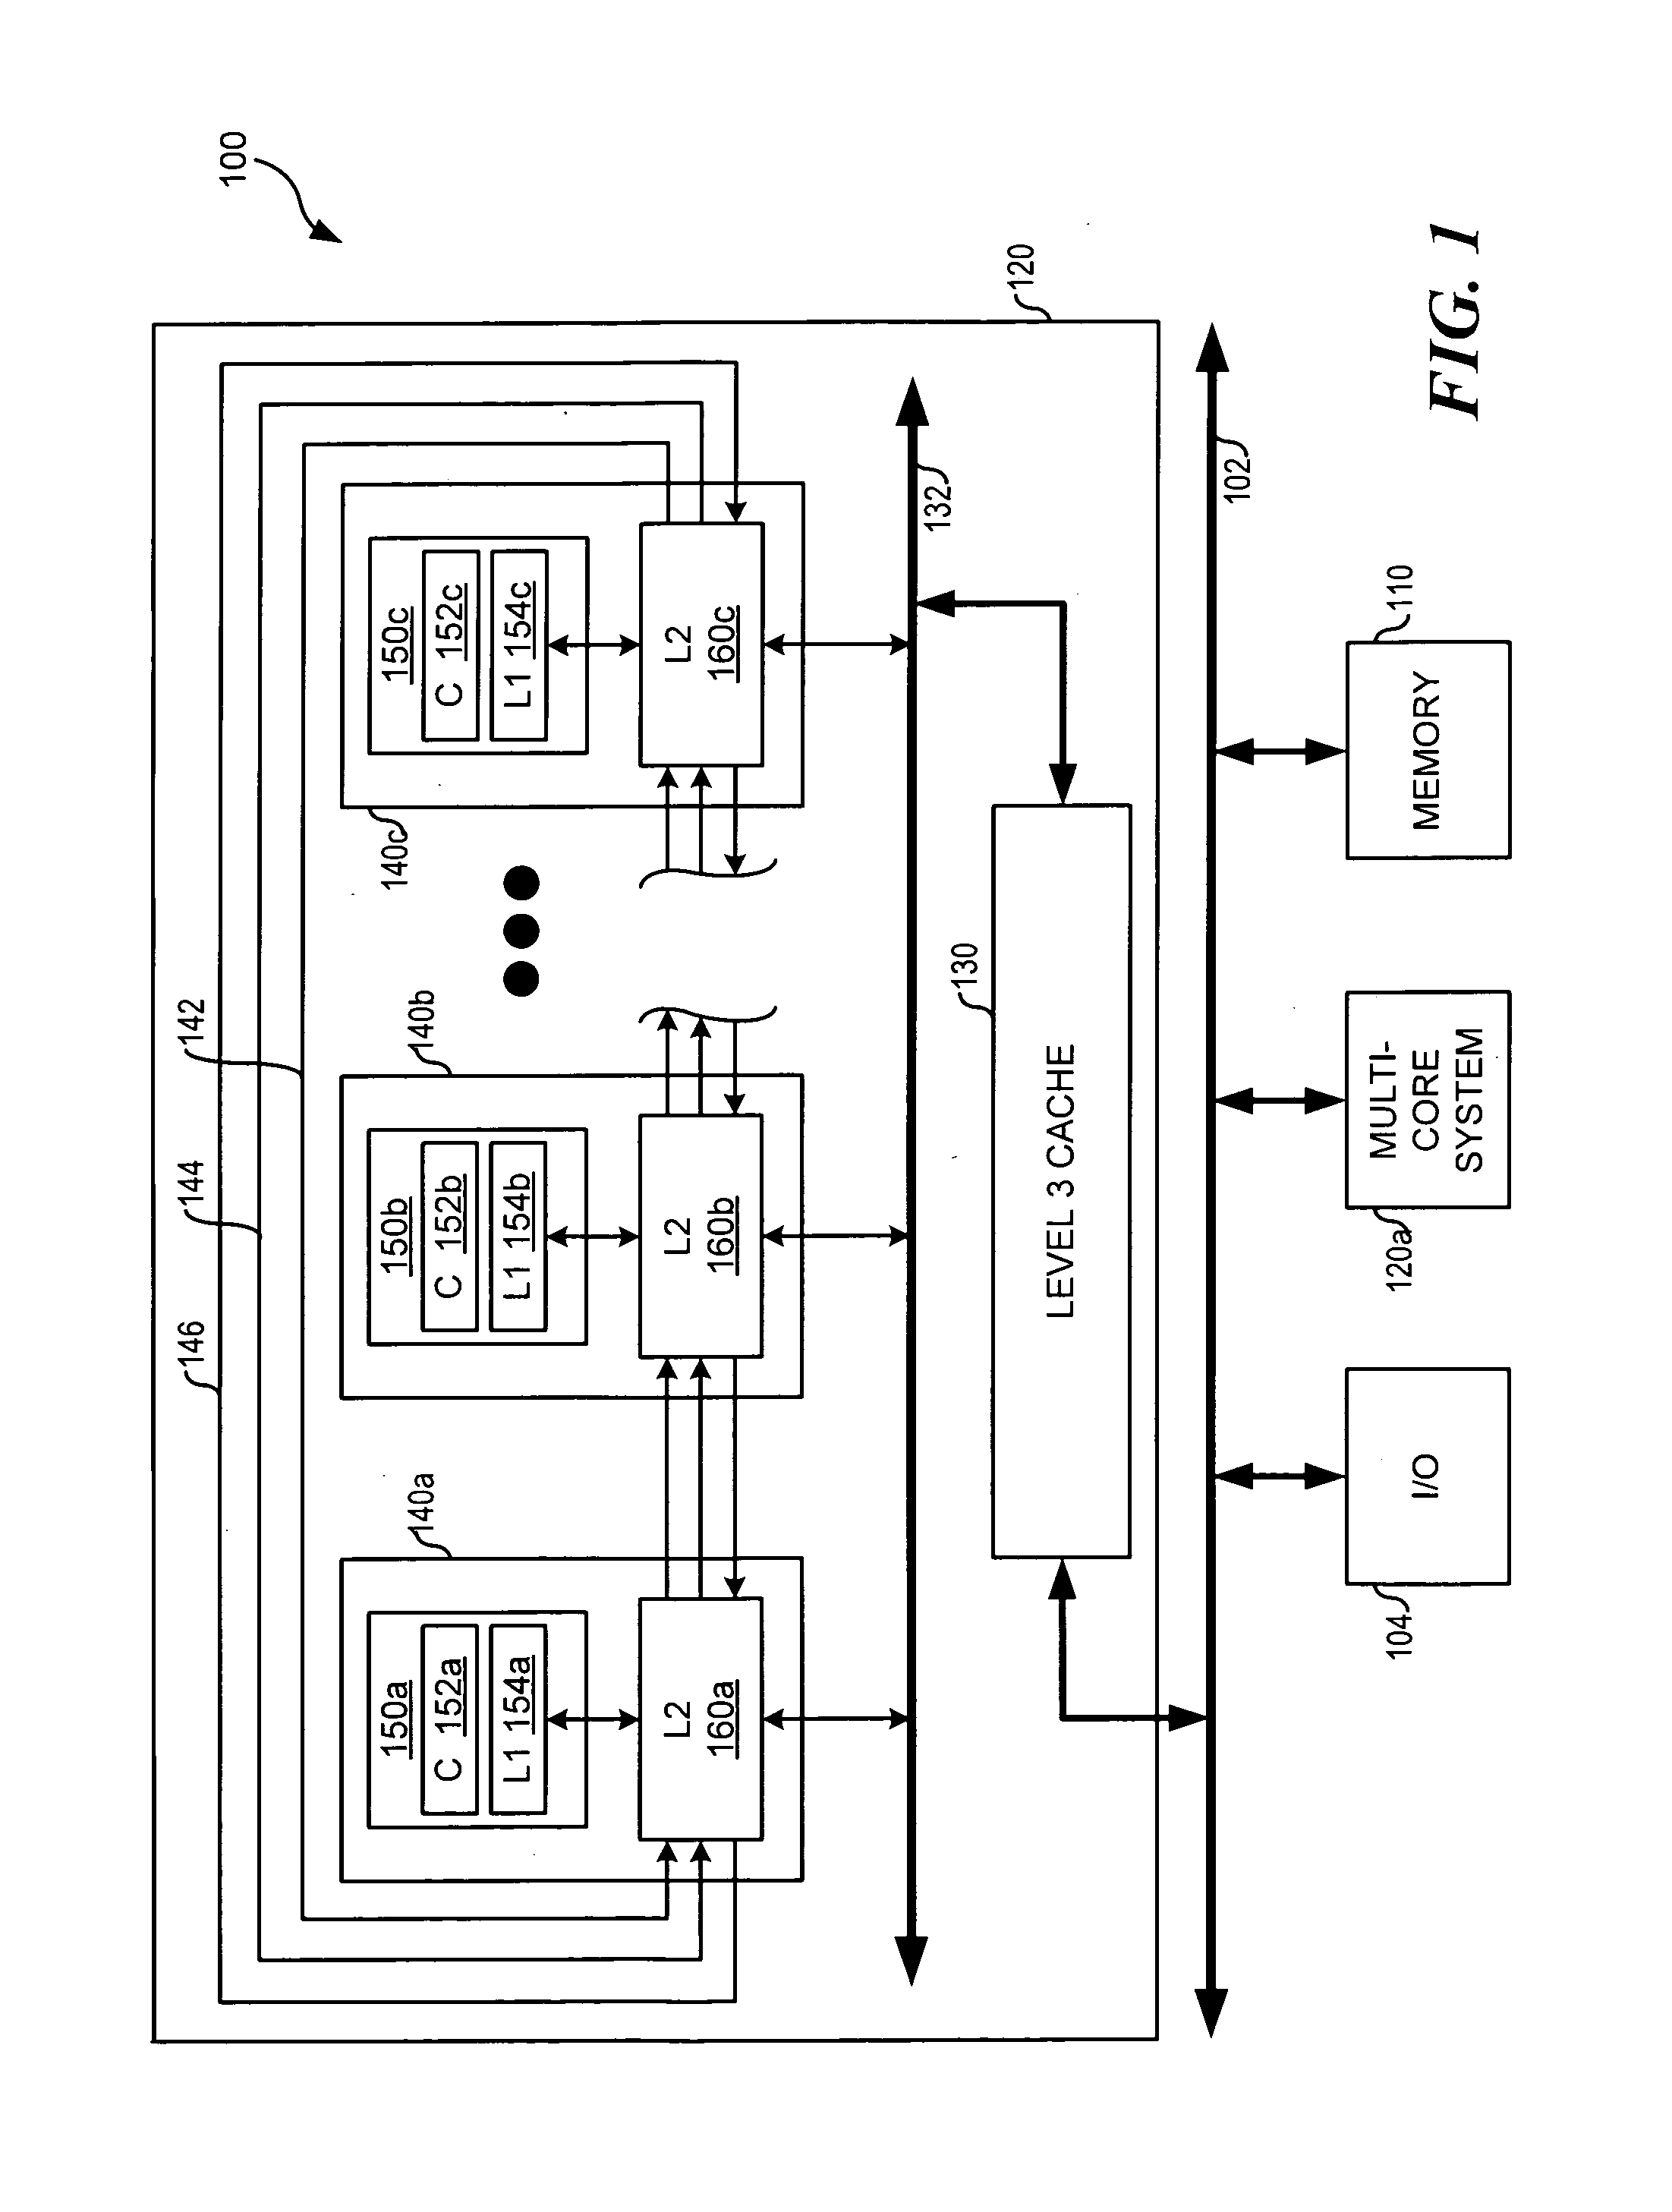 System and Method for Cache Line Replacement Selection in a Multiprocessor Environment